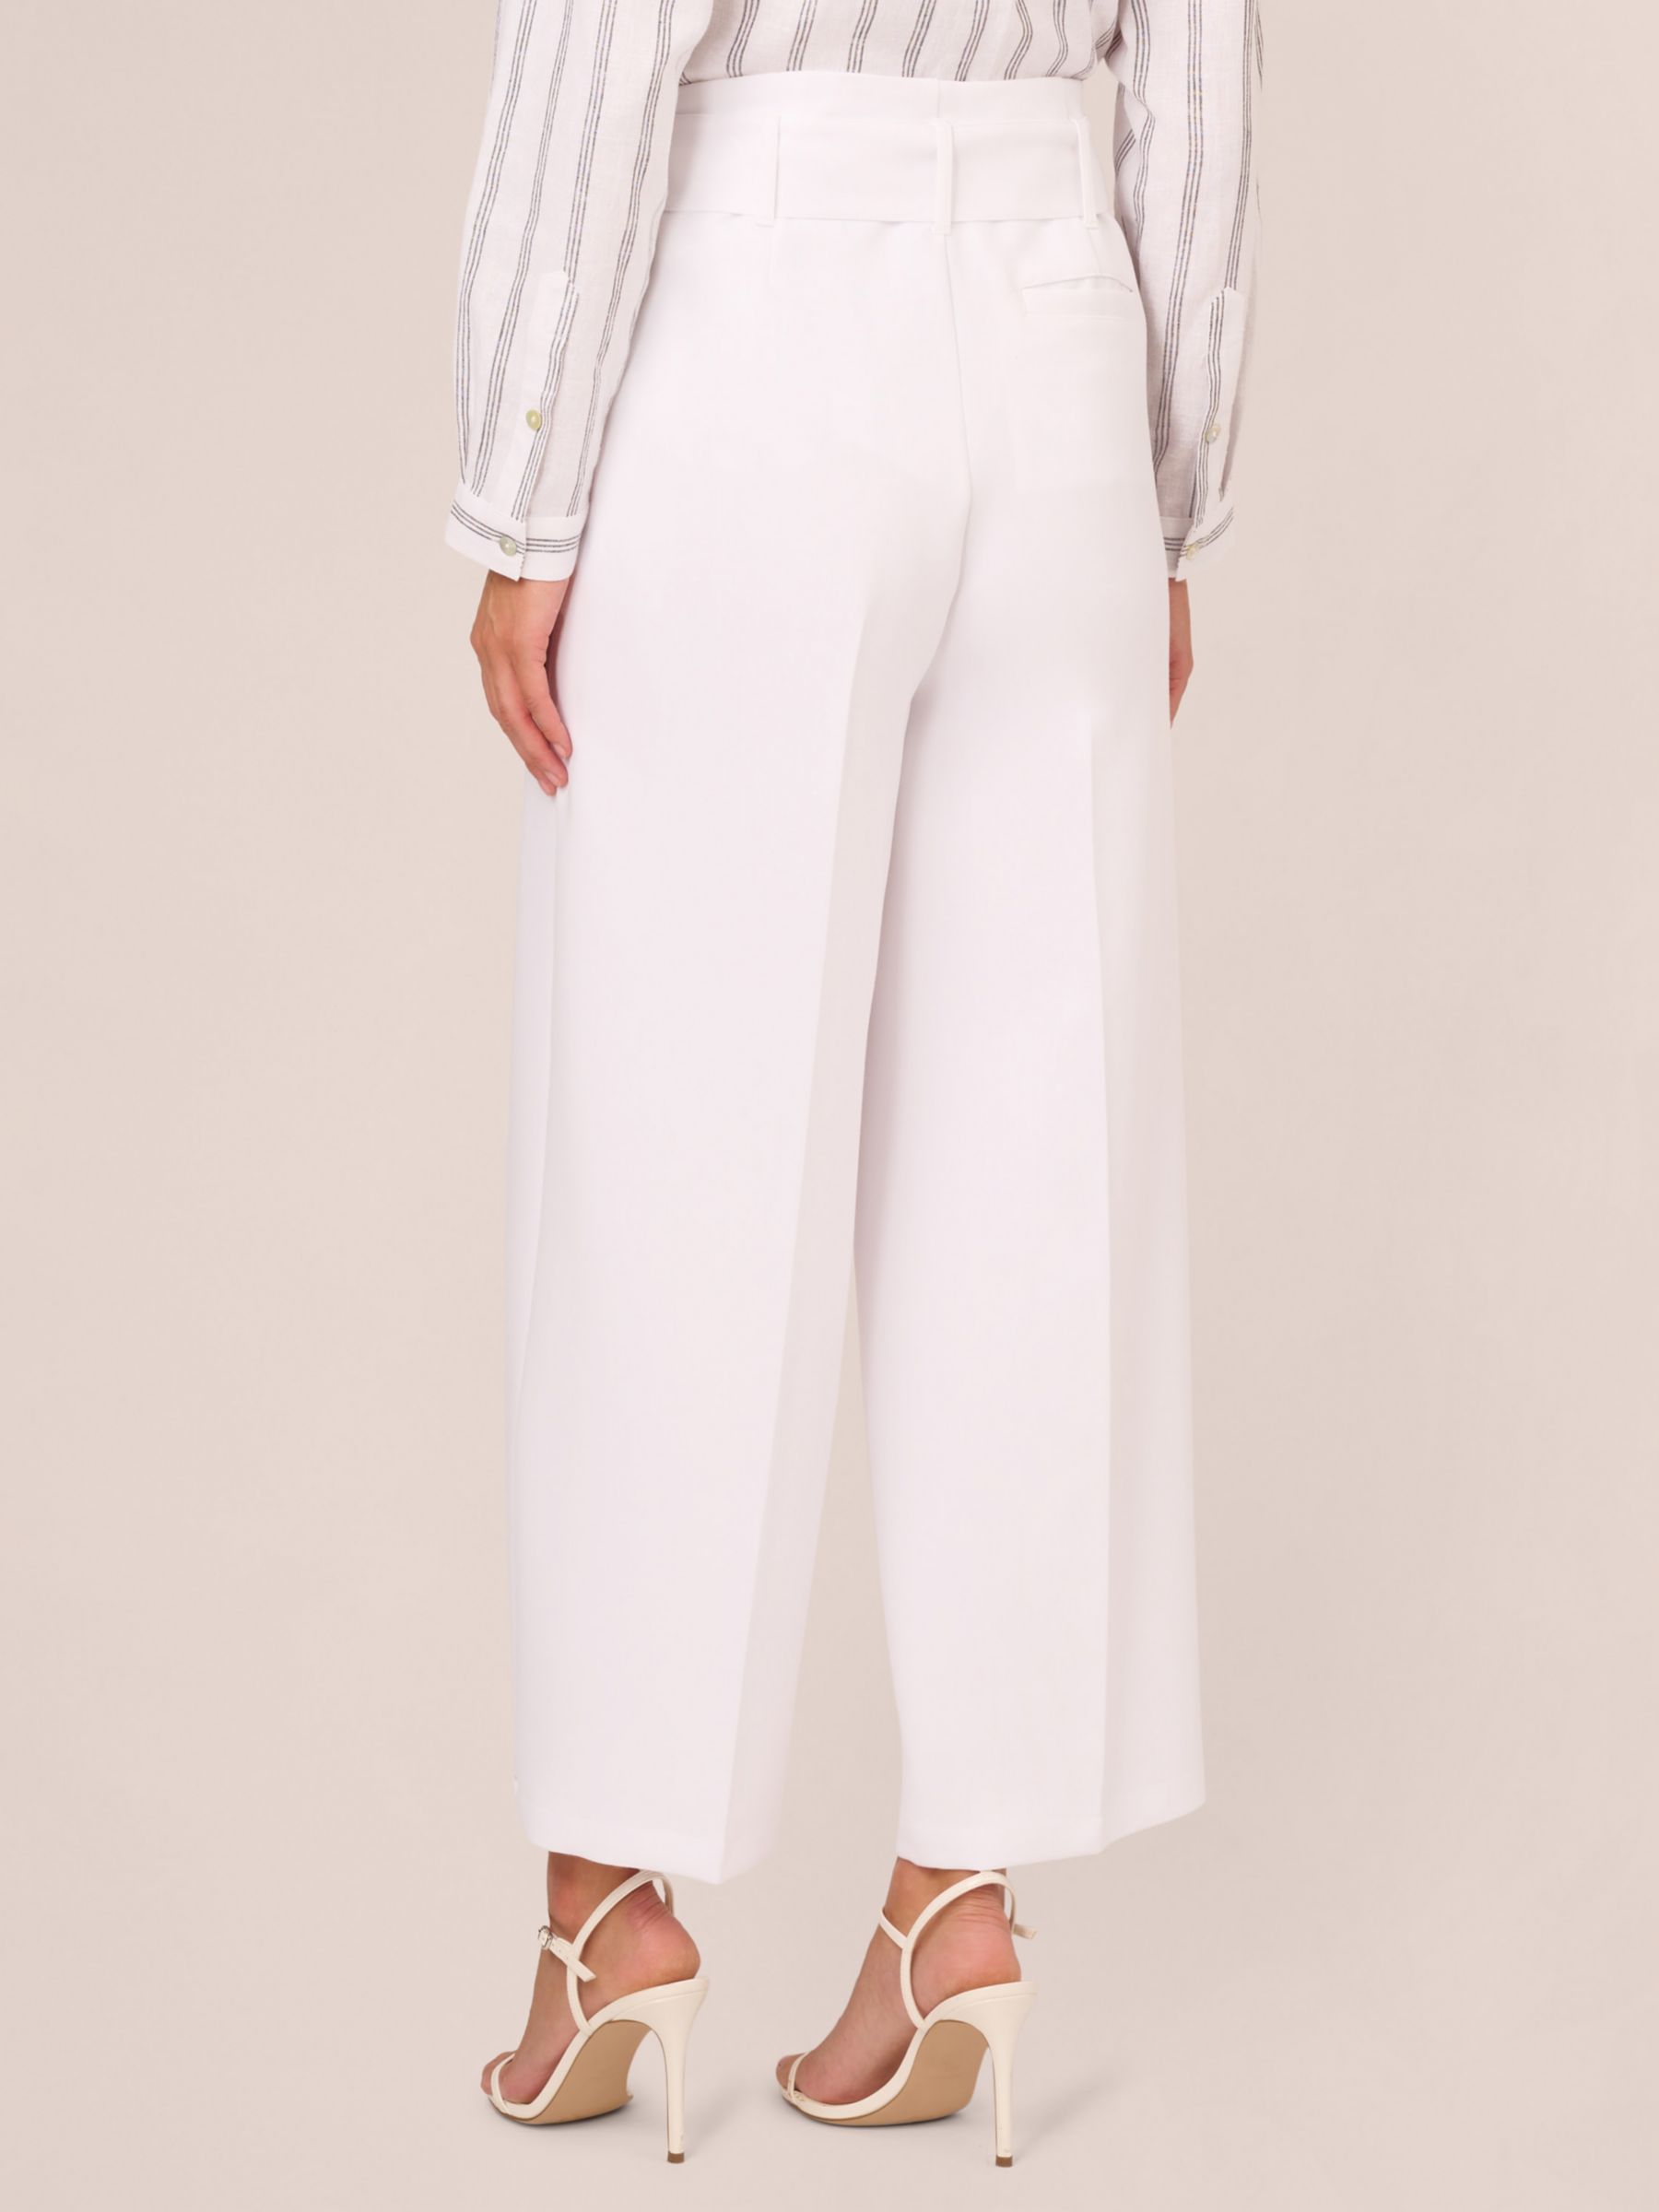 Adrianna Papell Belted Wide Leg Trousers, White, 18